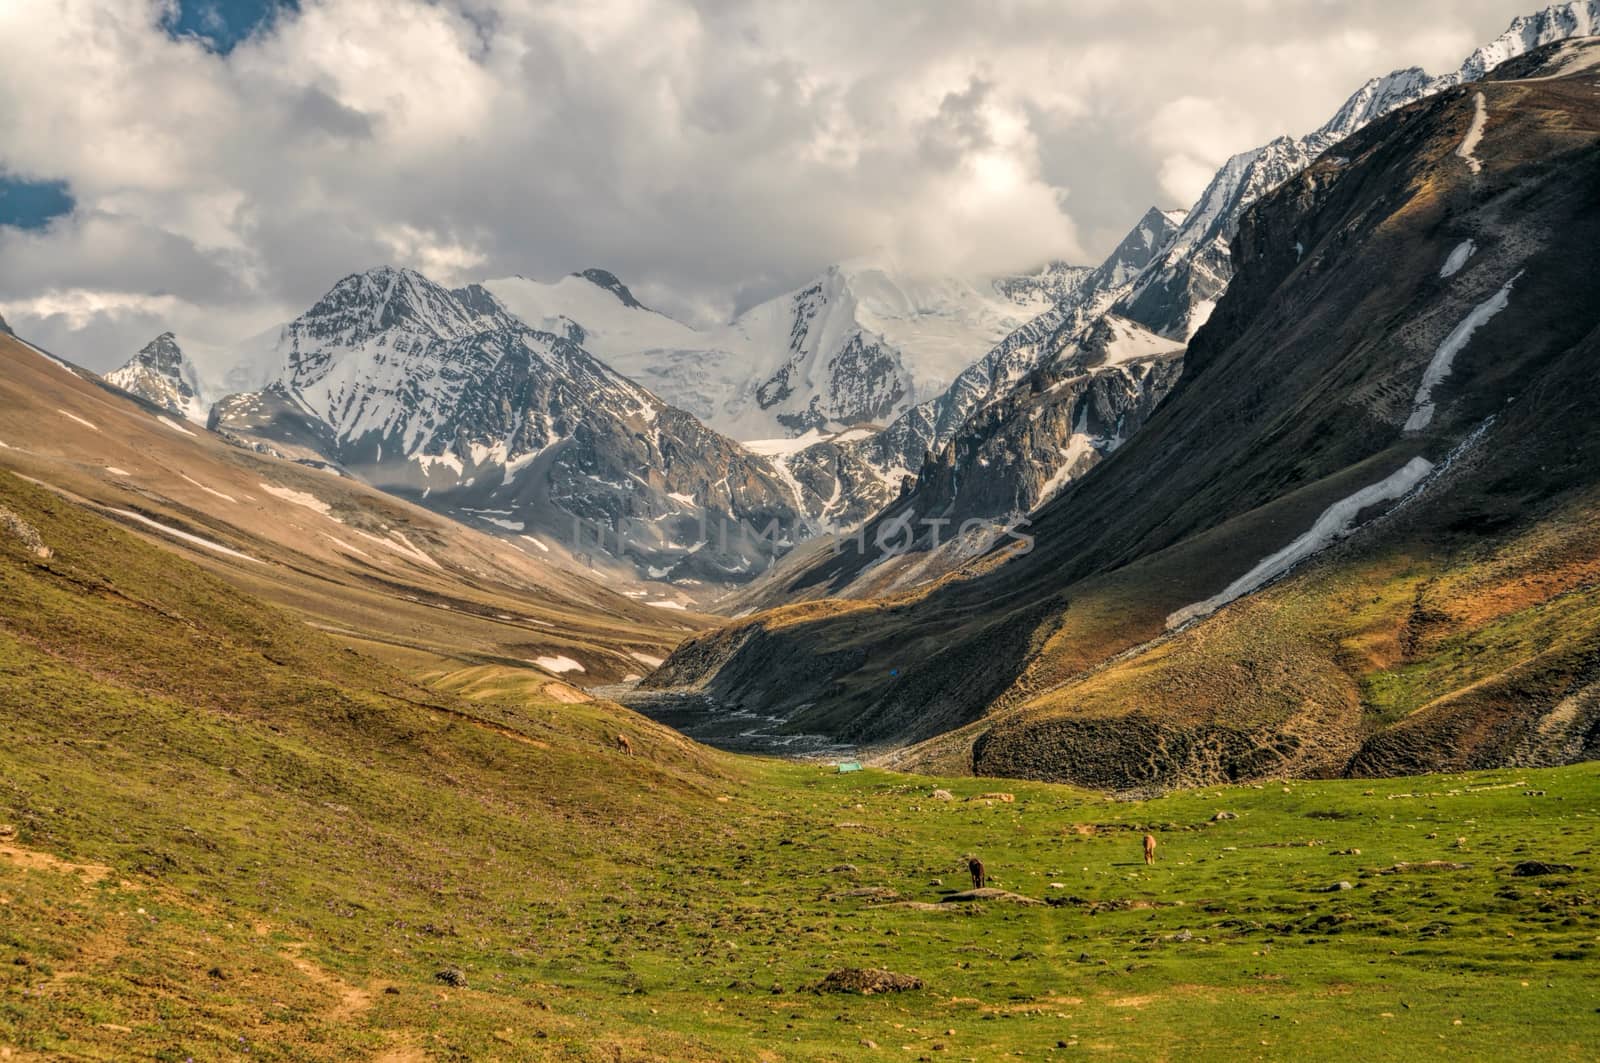 Valley in Himalayas by MichalKnitl